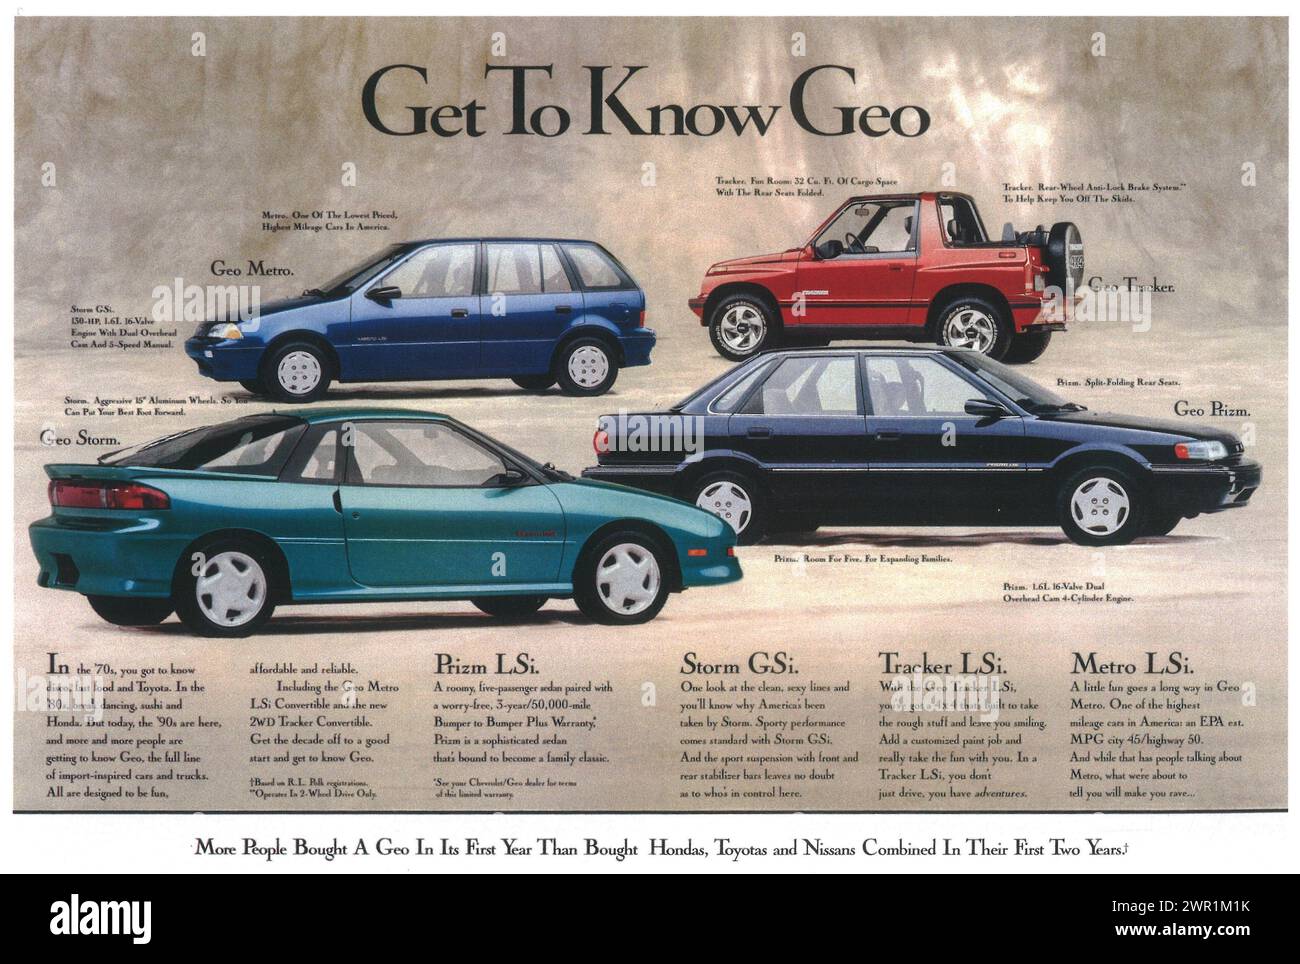 1990 Chevrolet GEO Prin Ad -Product Line-Get To Know Geo Stock Photo